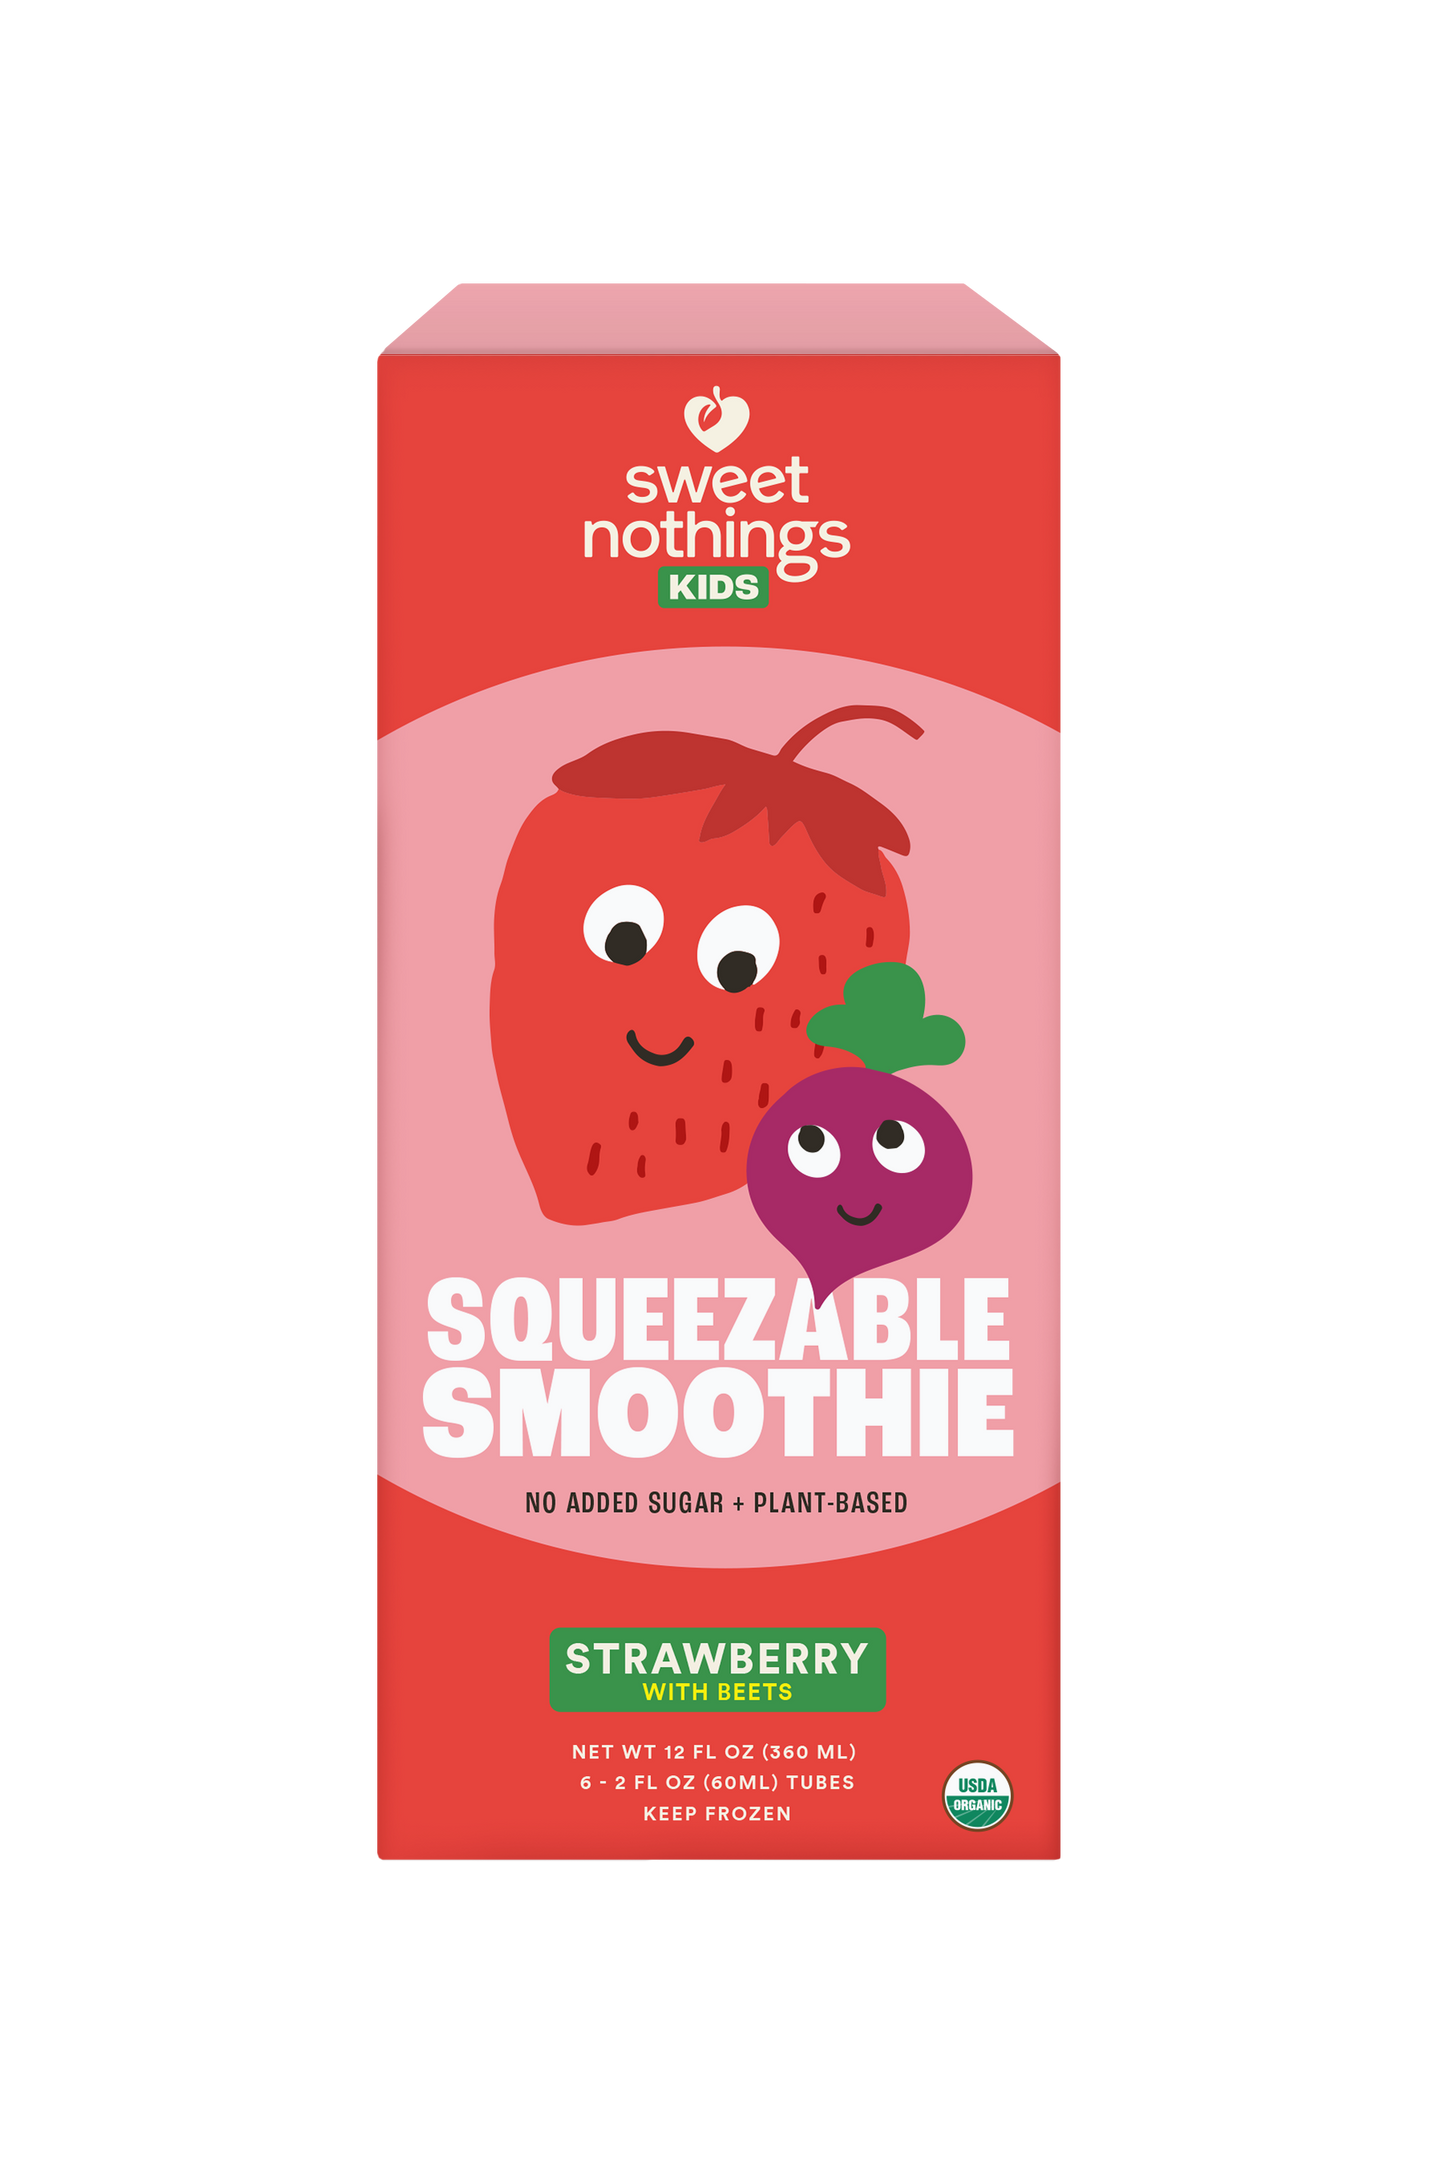 Sweet Nothings Squeezable Smoothies